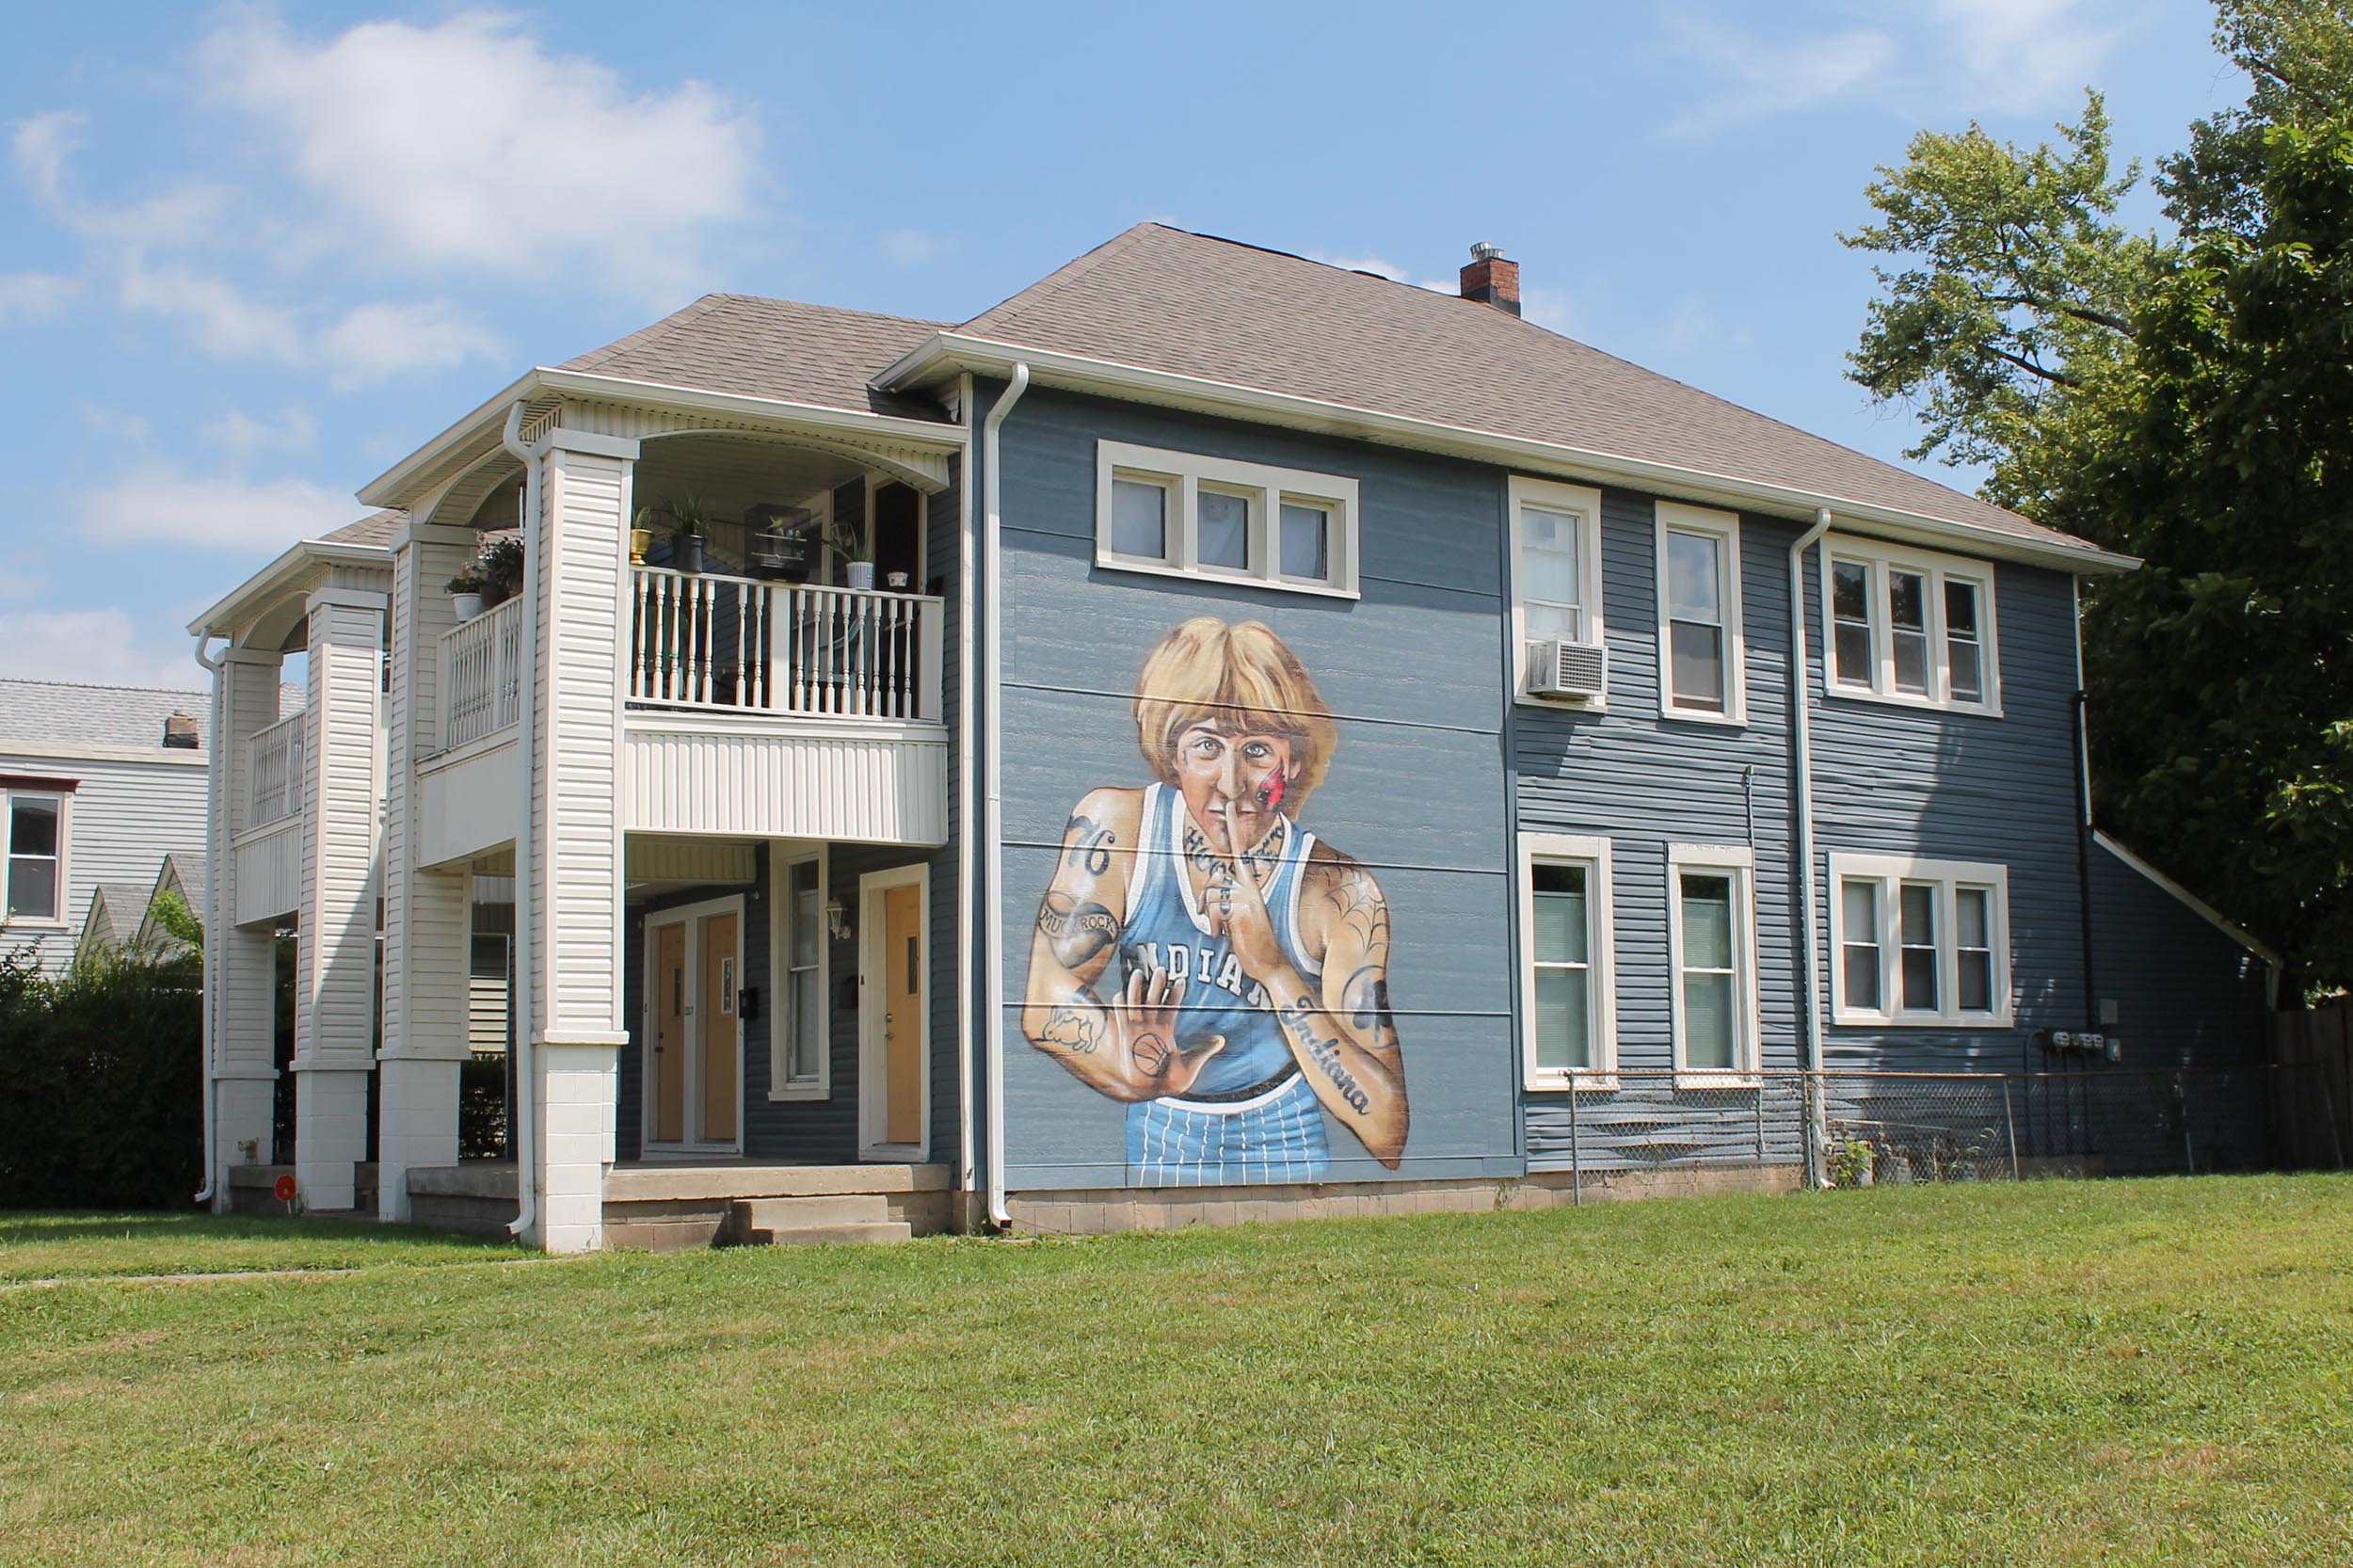 Muck Rock's mural is on the side of a private, multi-family home in Indianapolis's Fountain Square neighborhood. 